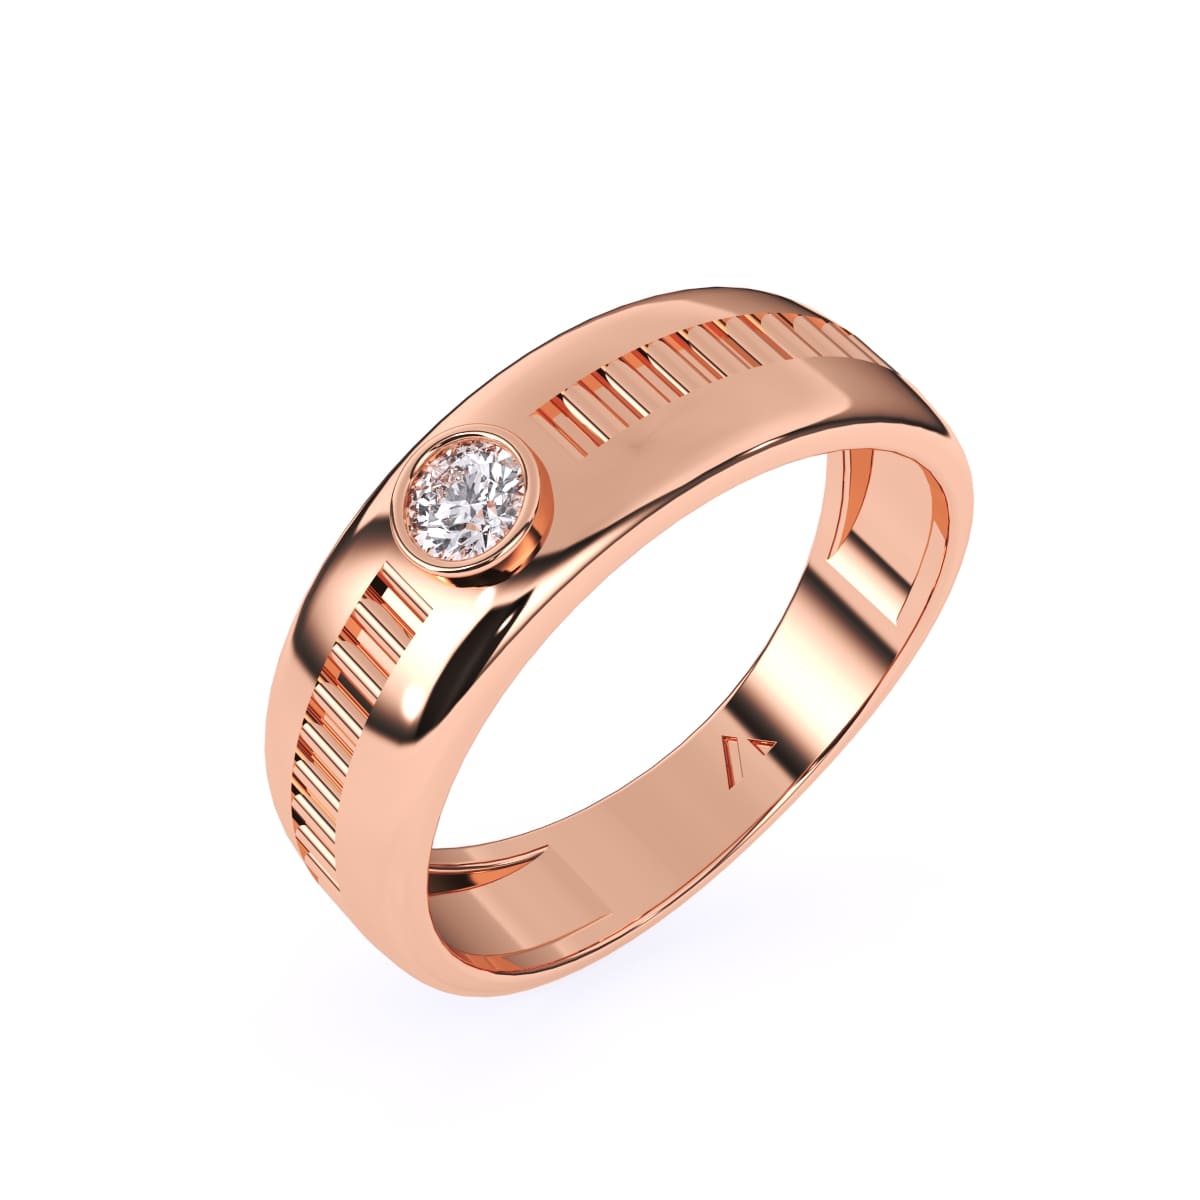 Purchase the High-Quality Men's Rings | GLAMIRA.com